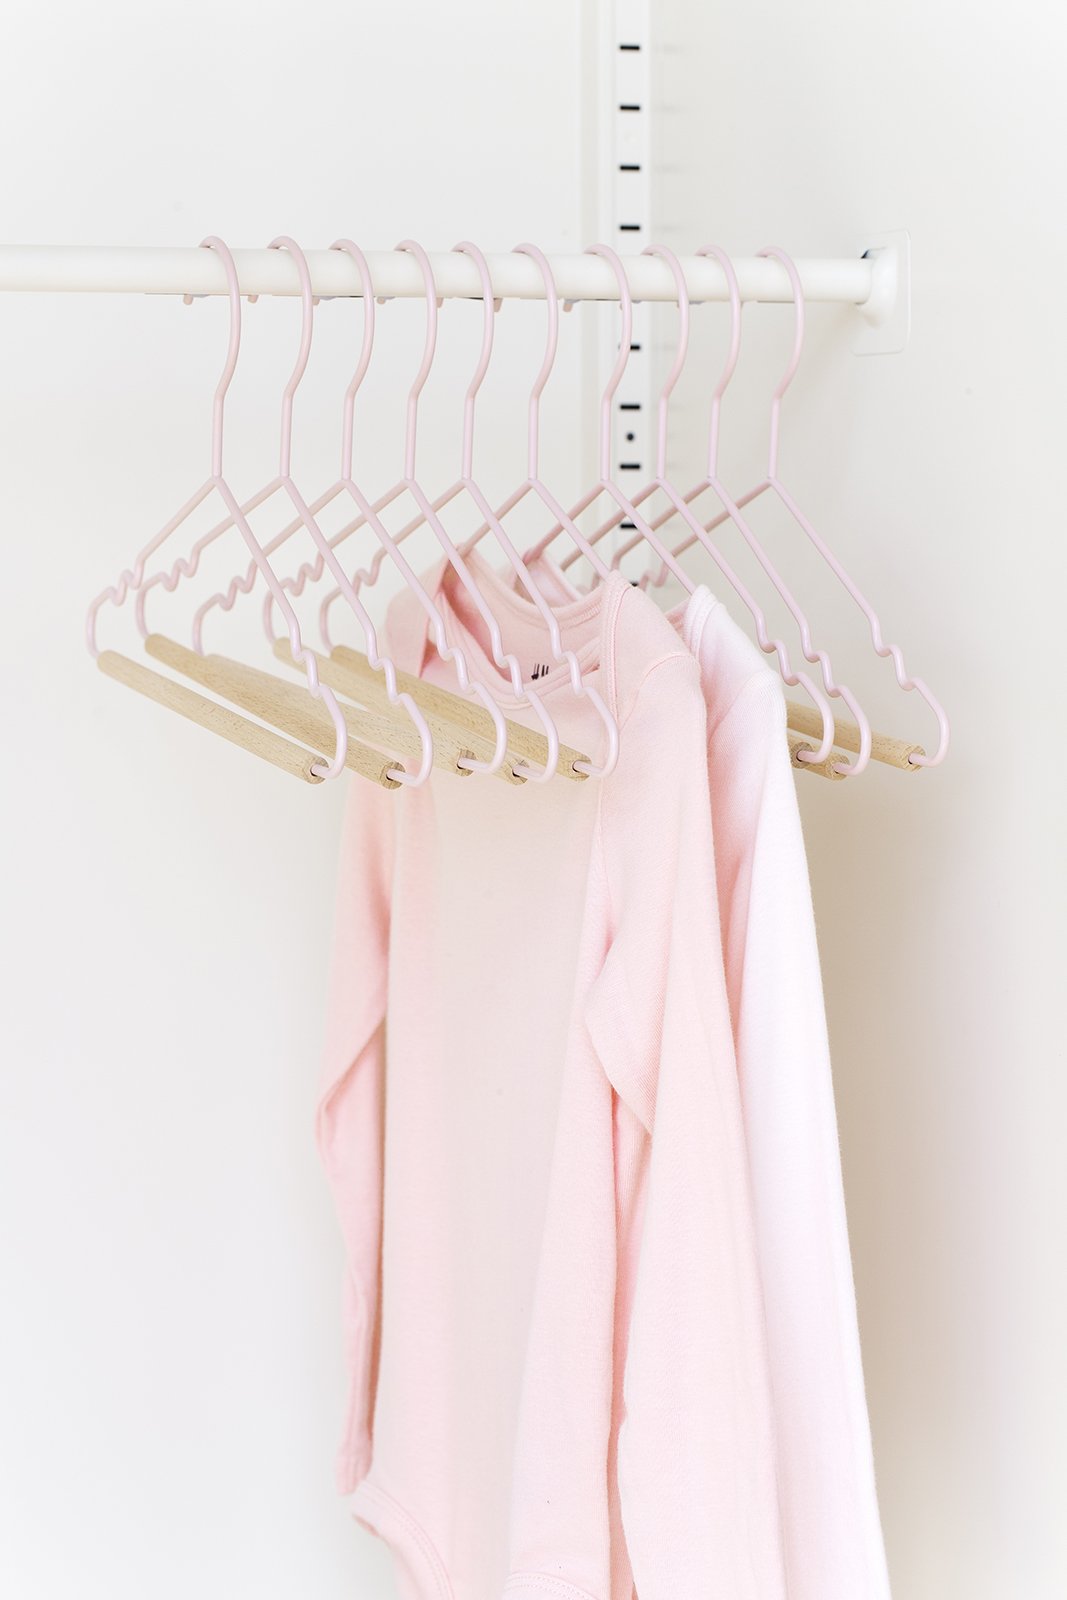 Mustard Made Kids Top Hangers in Blush Pack of 10